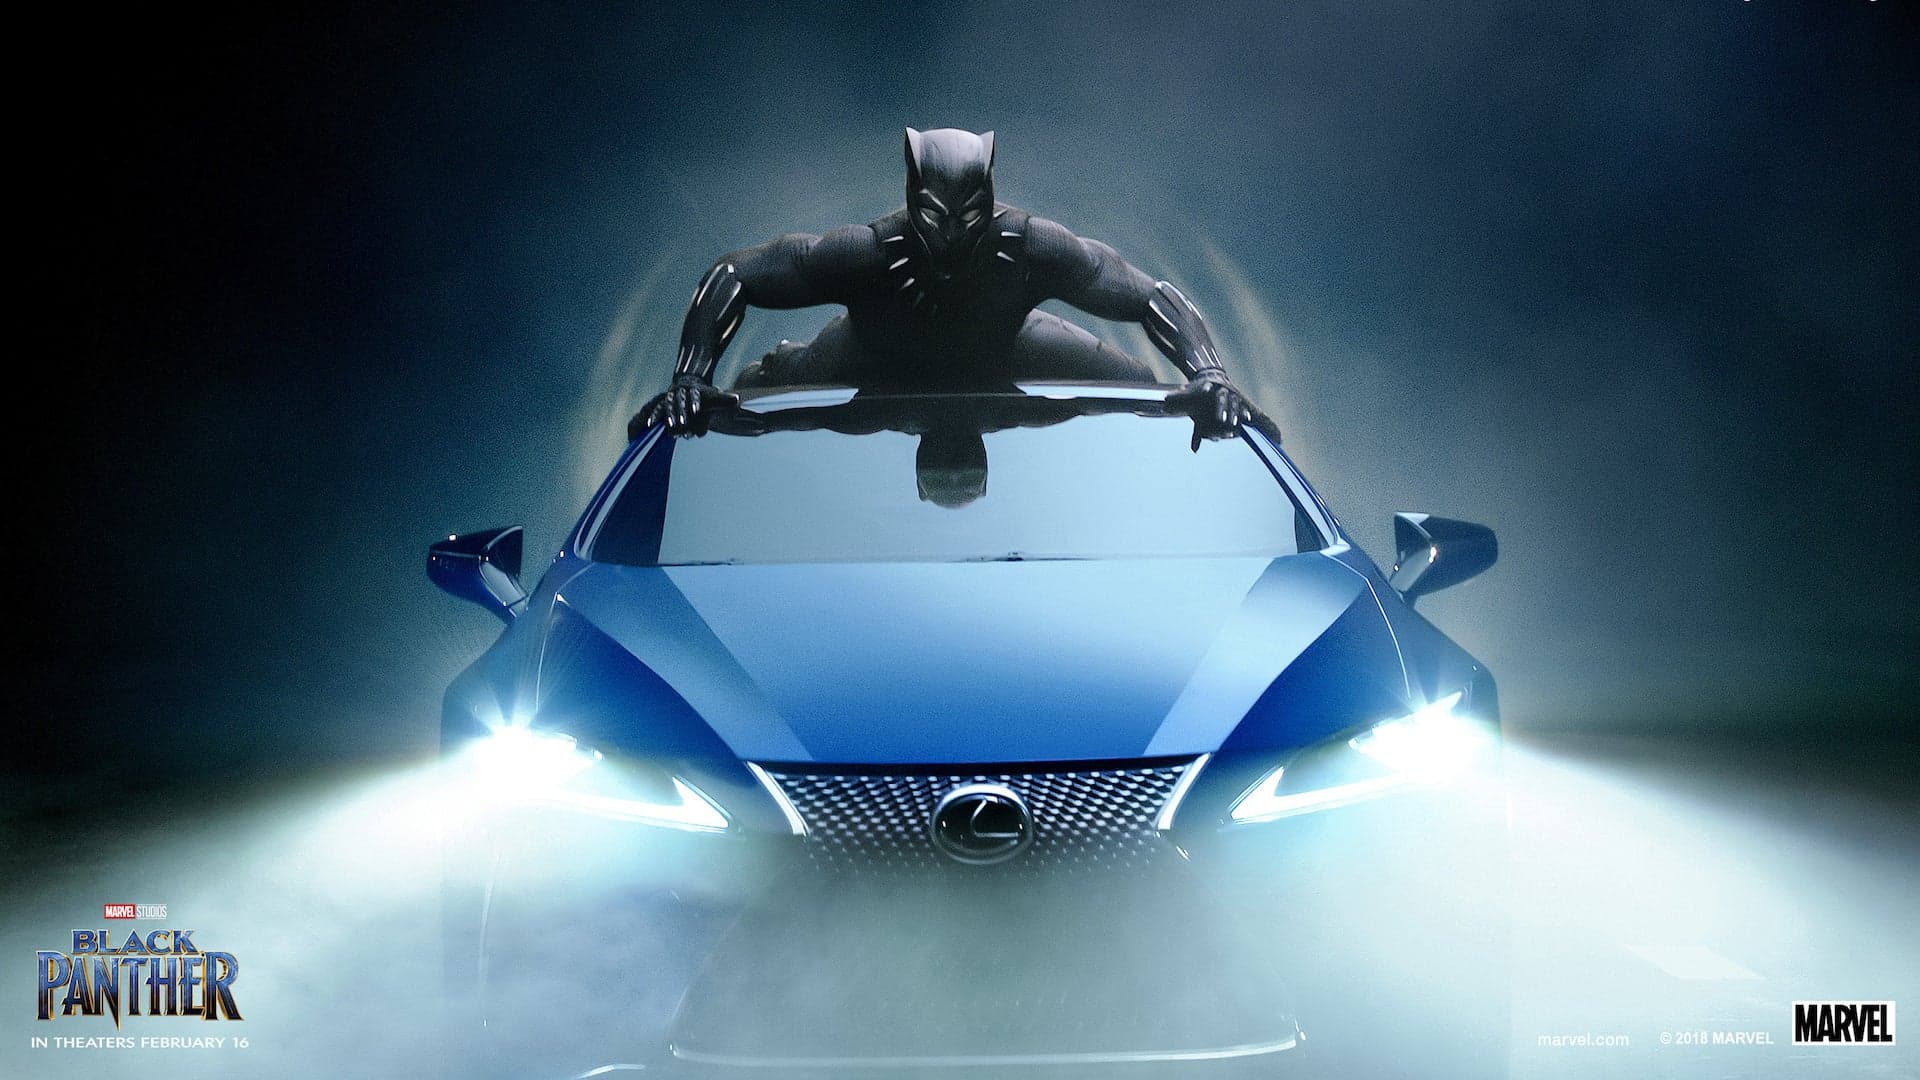 Lexus Teases With Black Panther Super Bowl LII Commercial